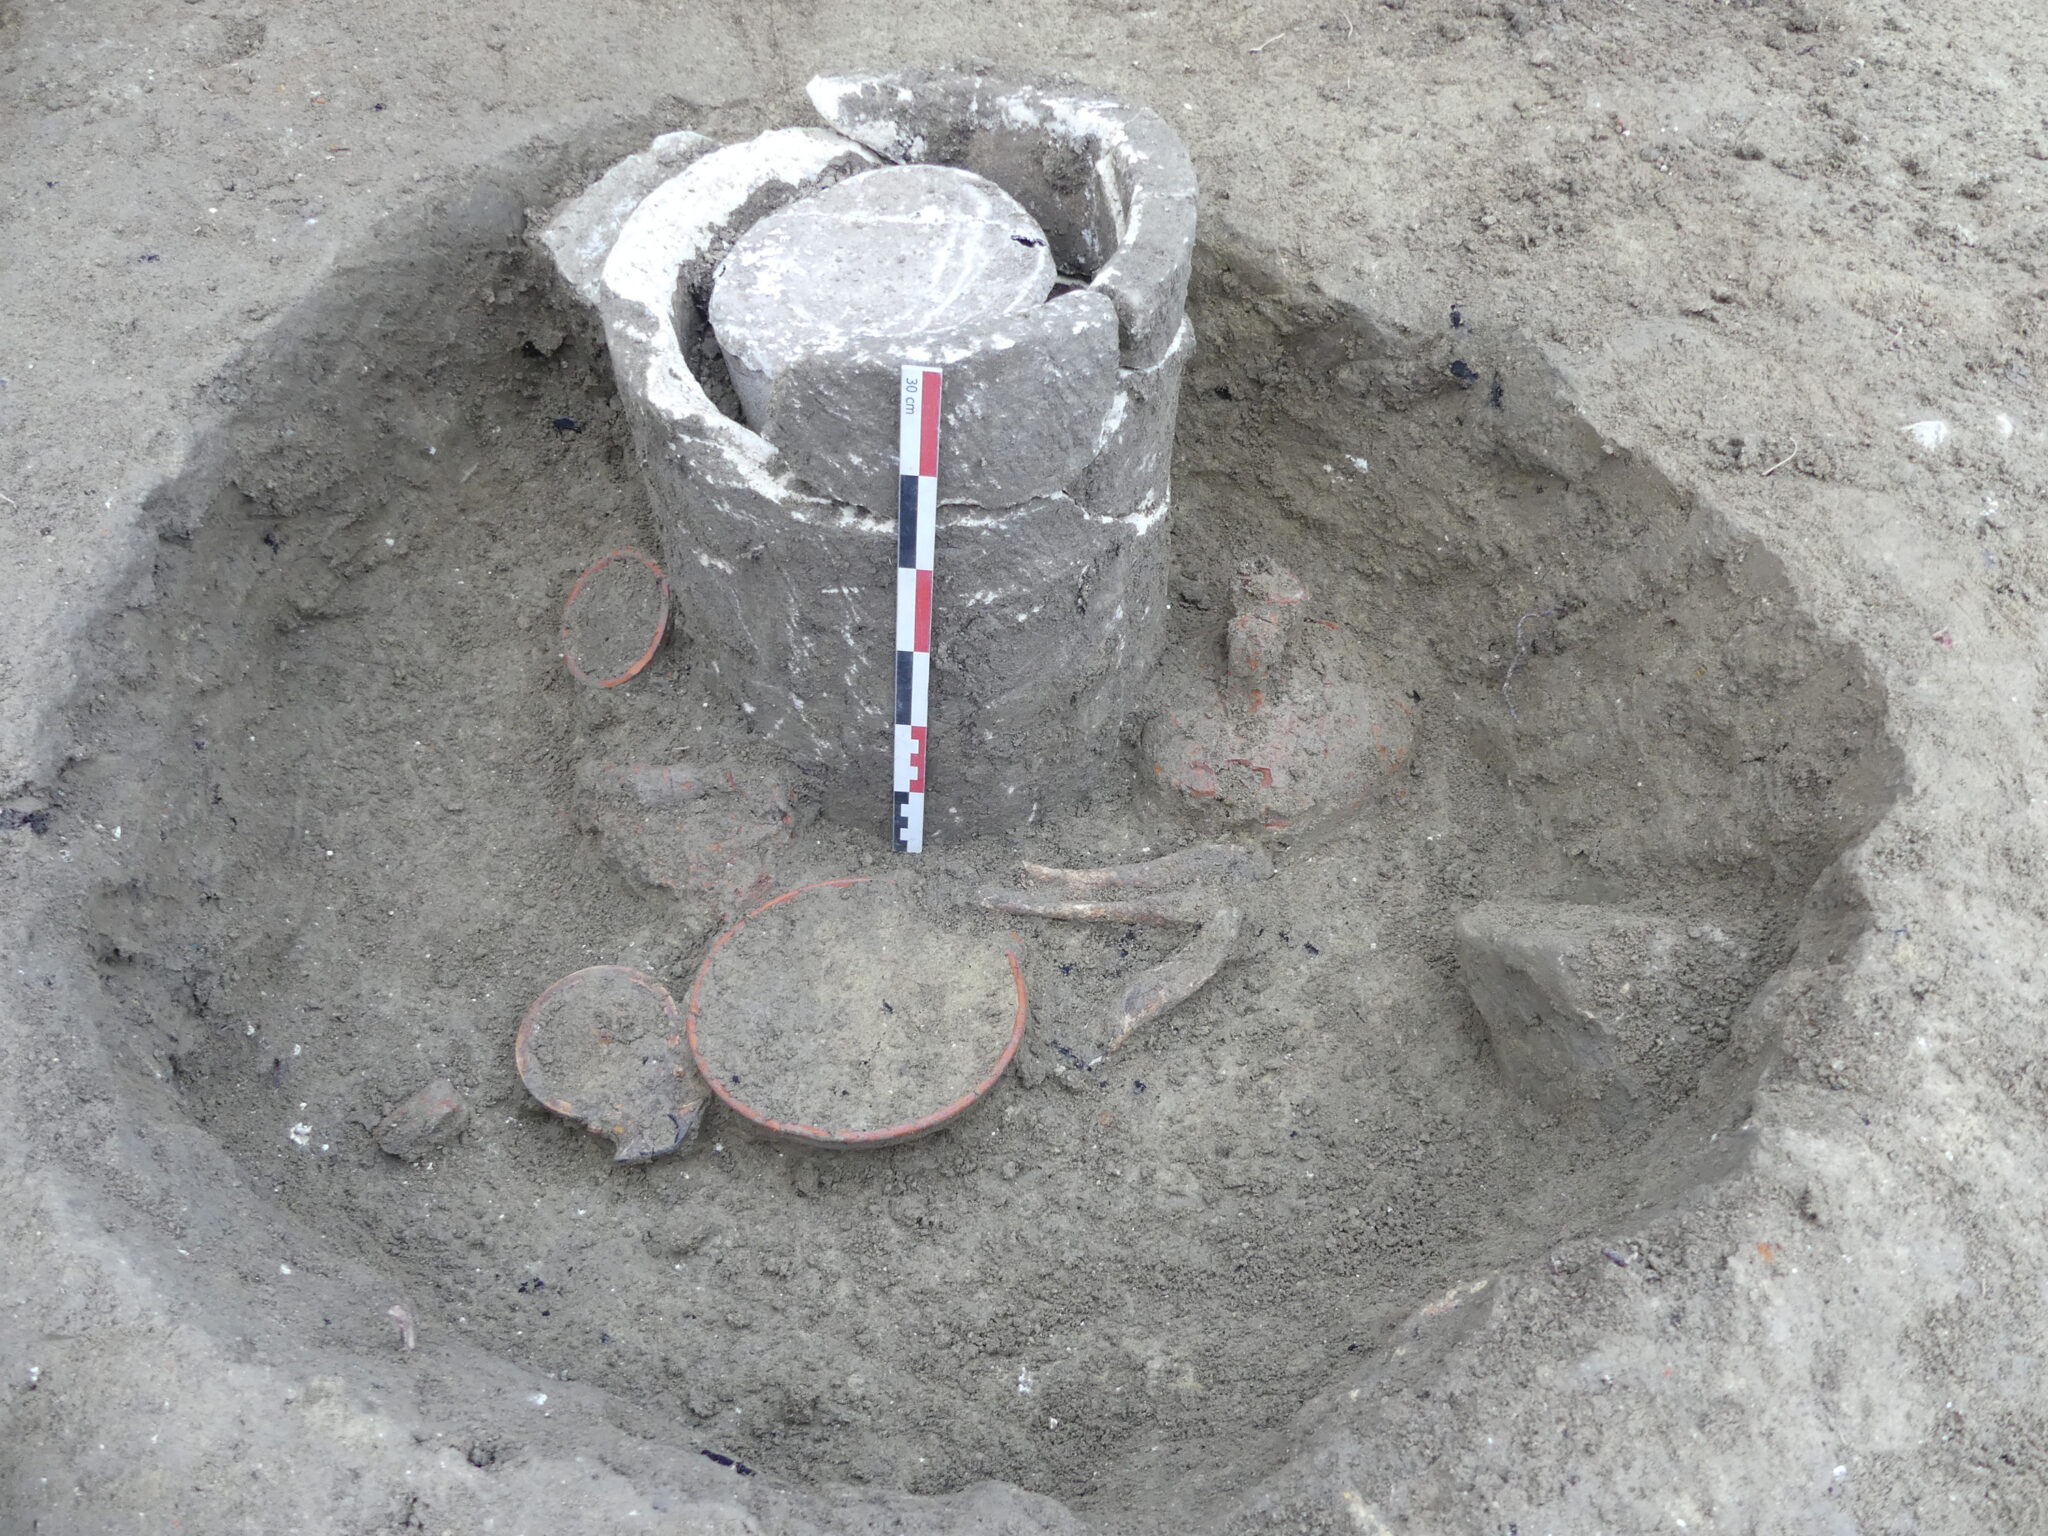 Urn-in-urn cremation burial found in France